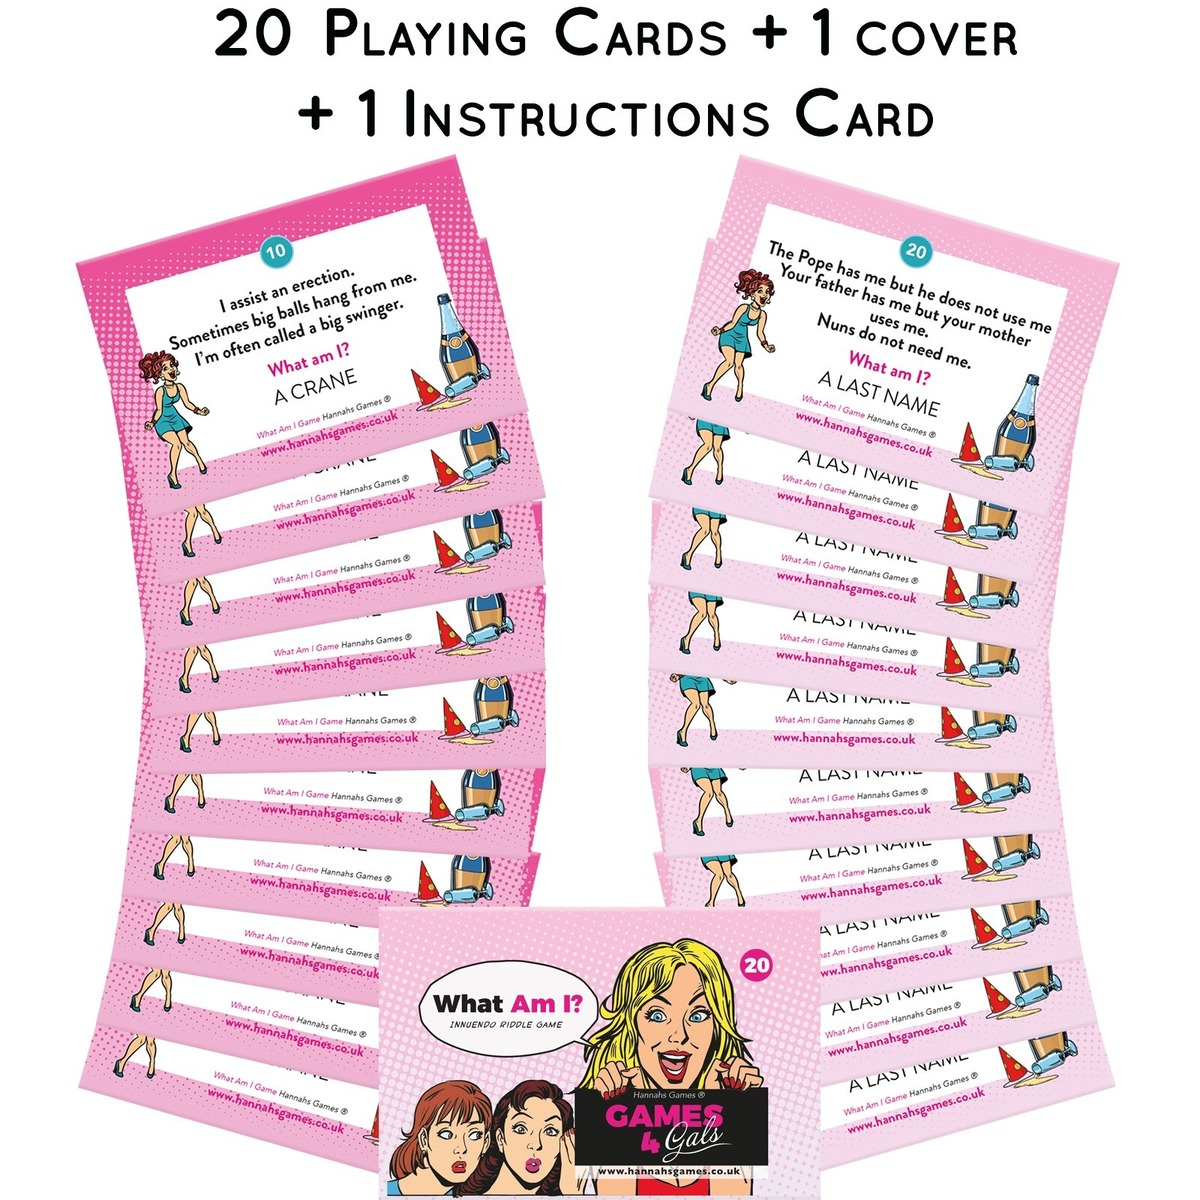 Fun Innuendo Riddle Erotic Card Game / Adult Erotic Game for Hen Party EVEs SECRETS